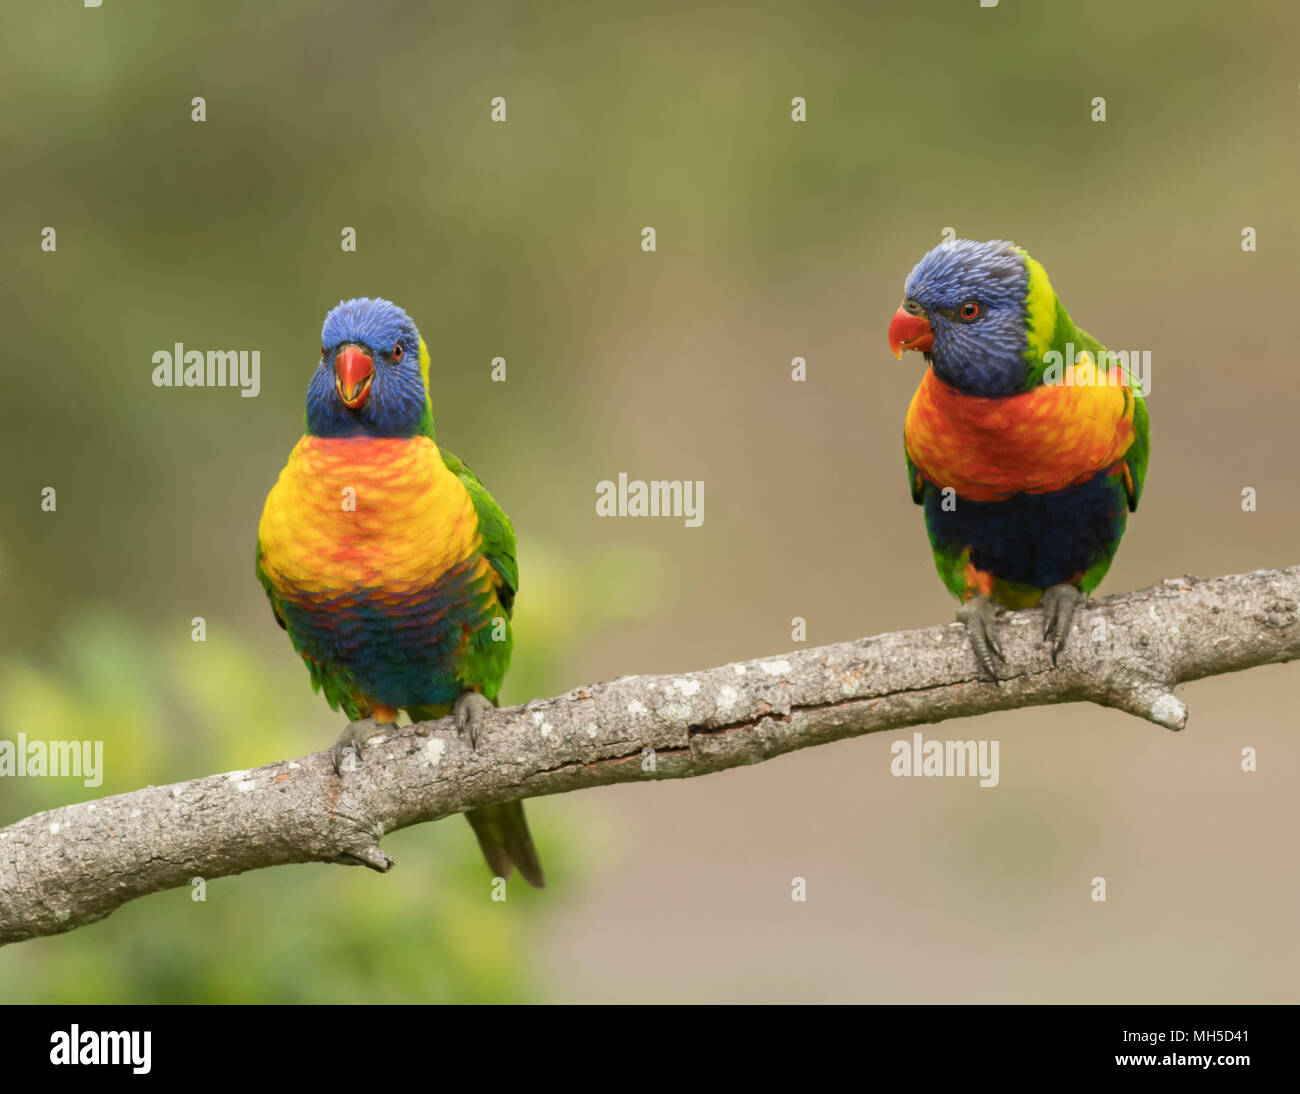 A pair of Rainbow Lorikeets on a branch, colorful birds found across Australia. Stock Photo